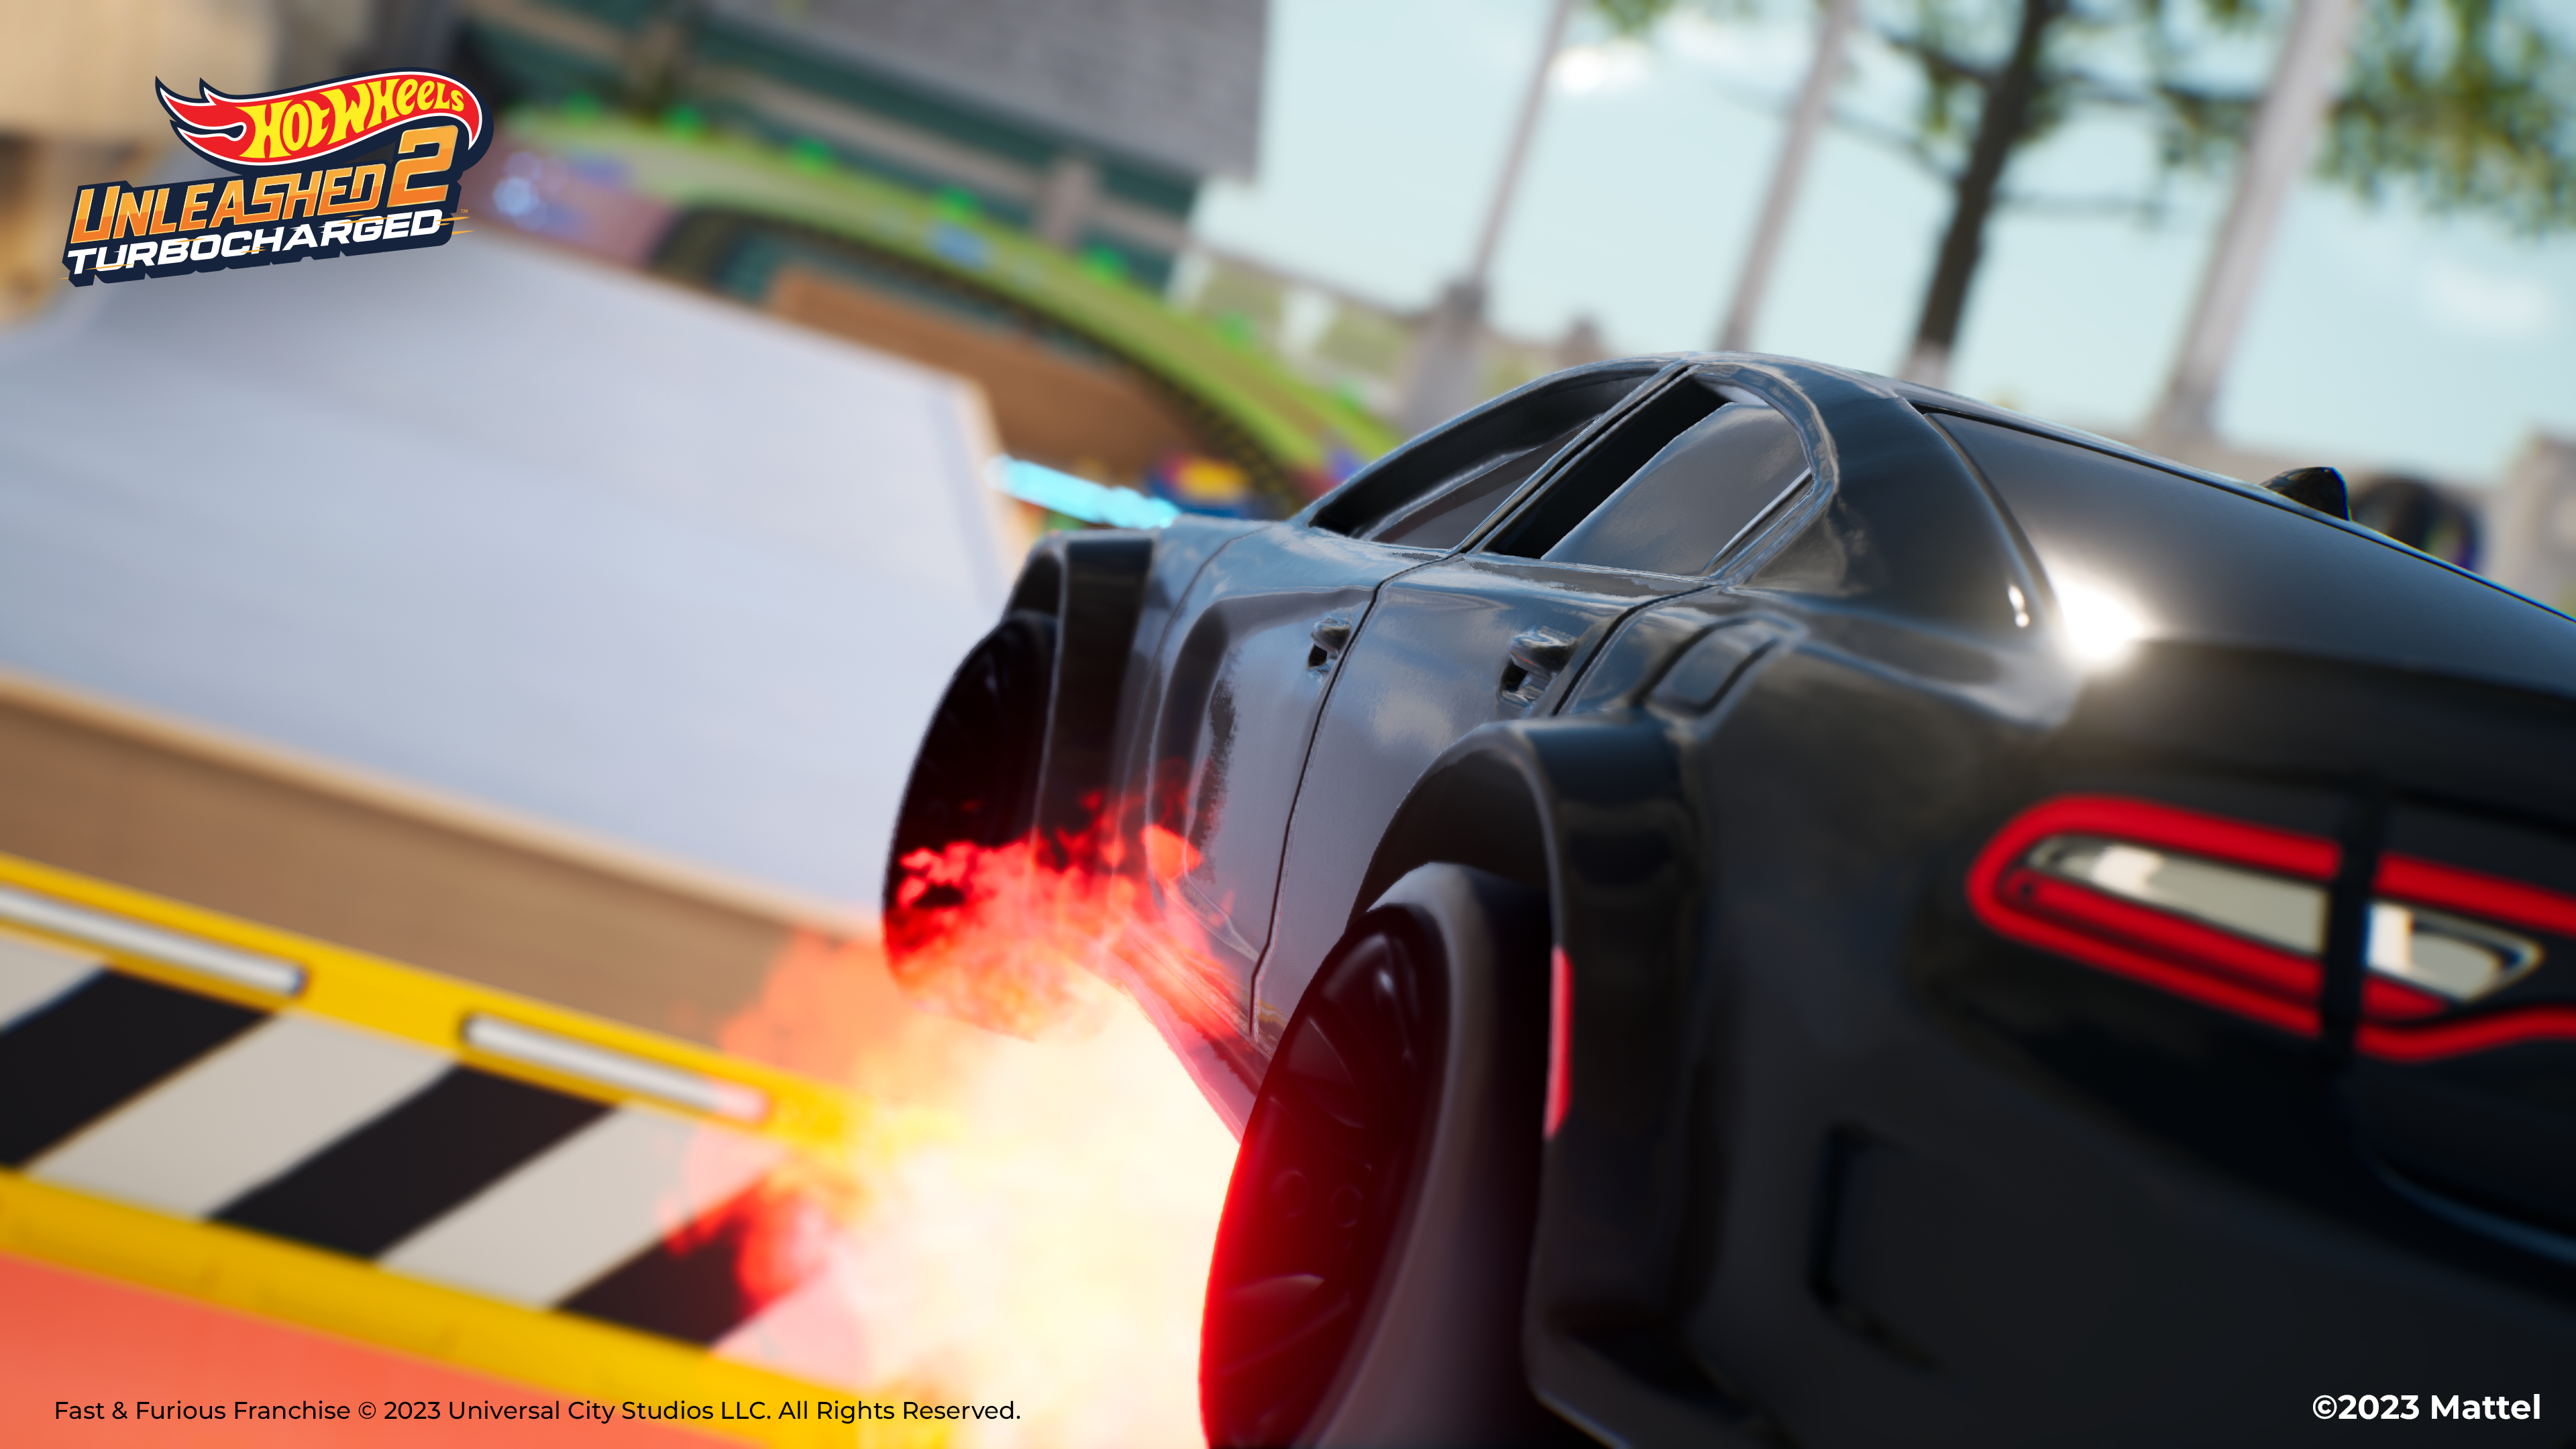 Hot Wheels Turbocharged to Furious Feature & 2: Cars Fast Unleashed